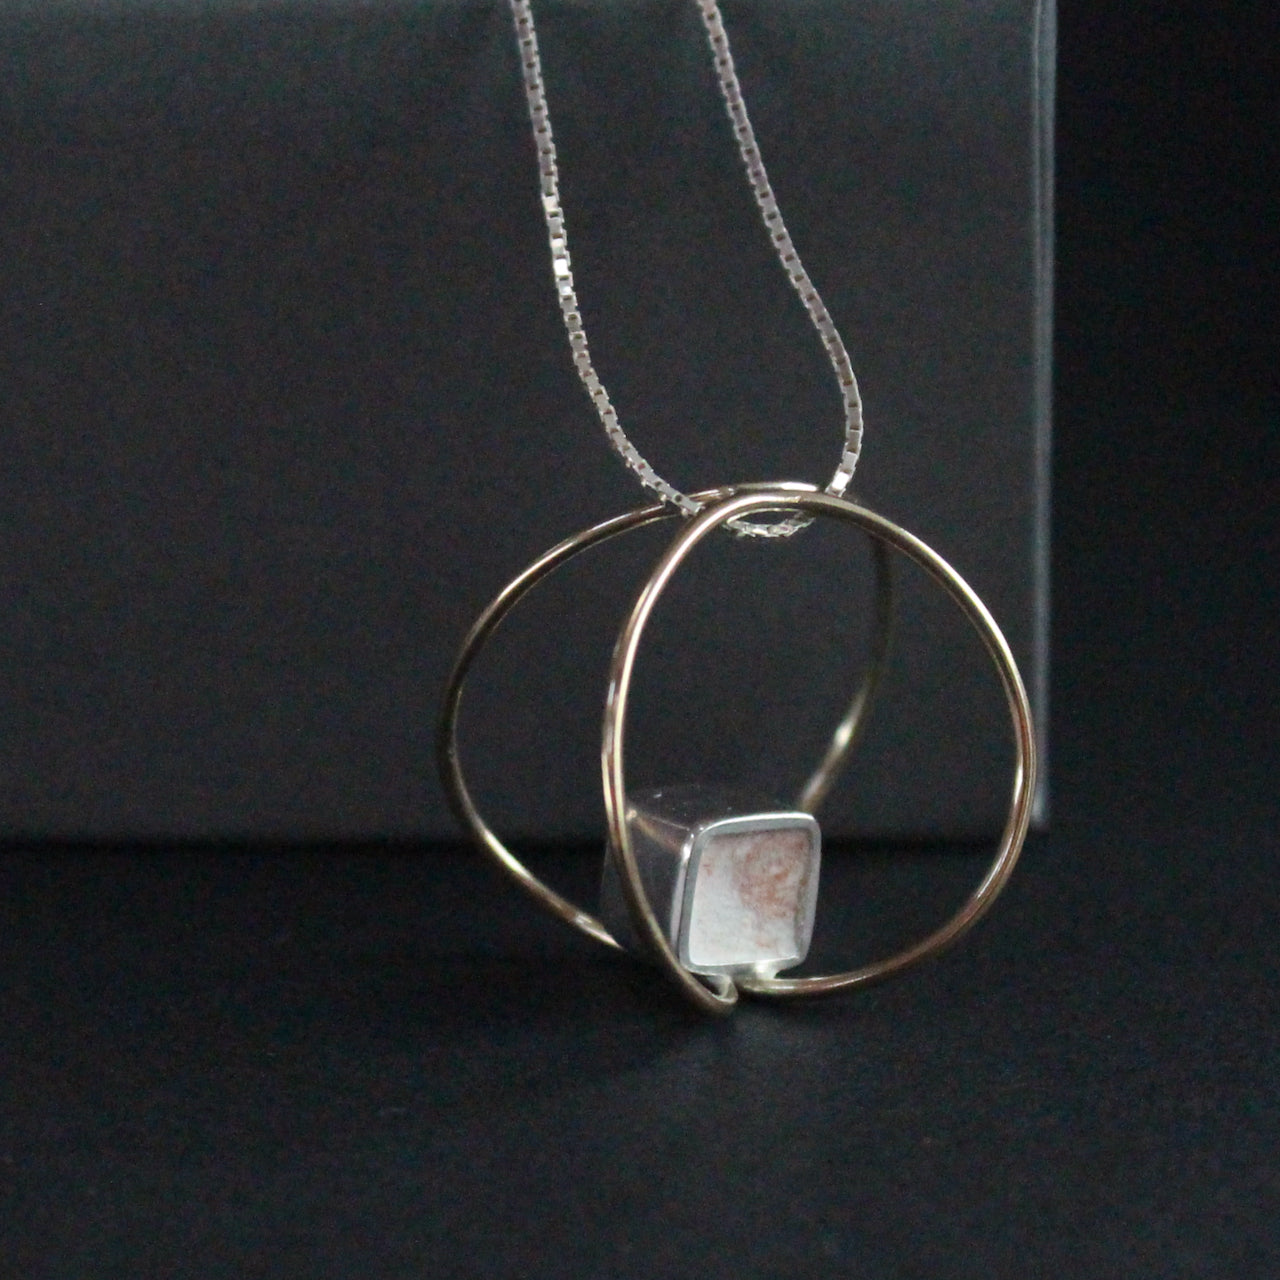 9ct gold and silver link pendant by artist Amy Stringer.